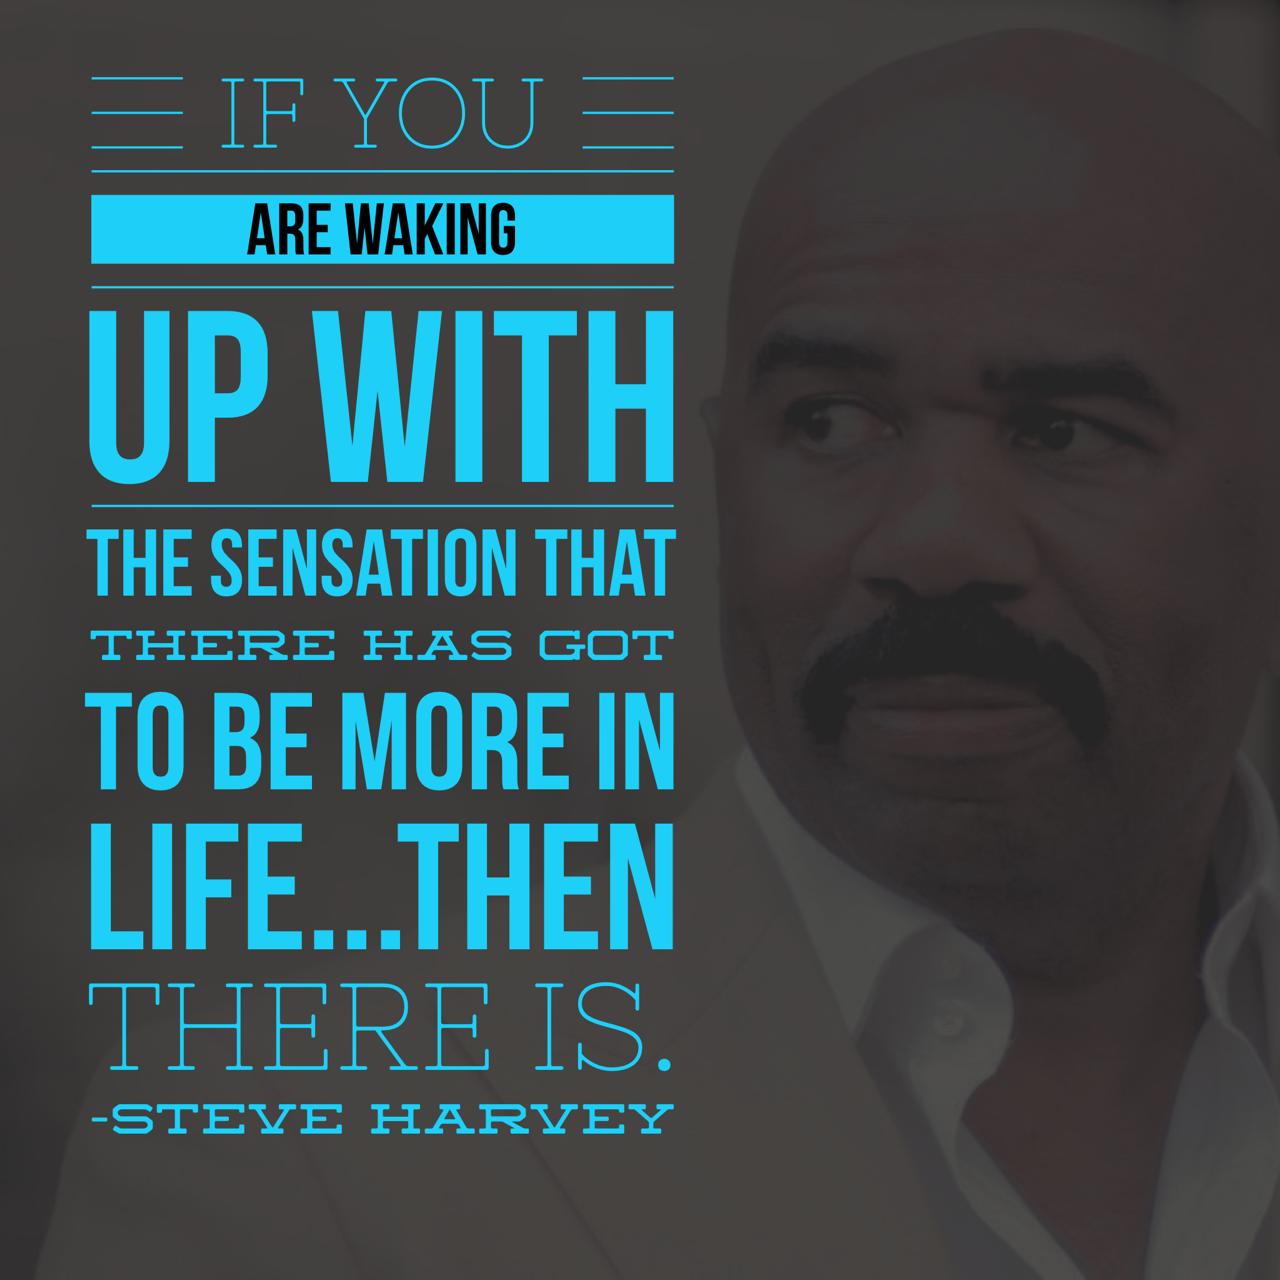 19 Steve Harvey Quotes on Success To Share on Facebook